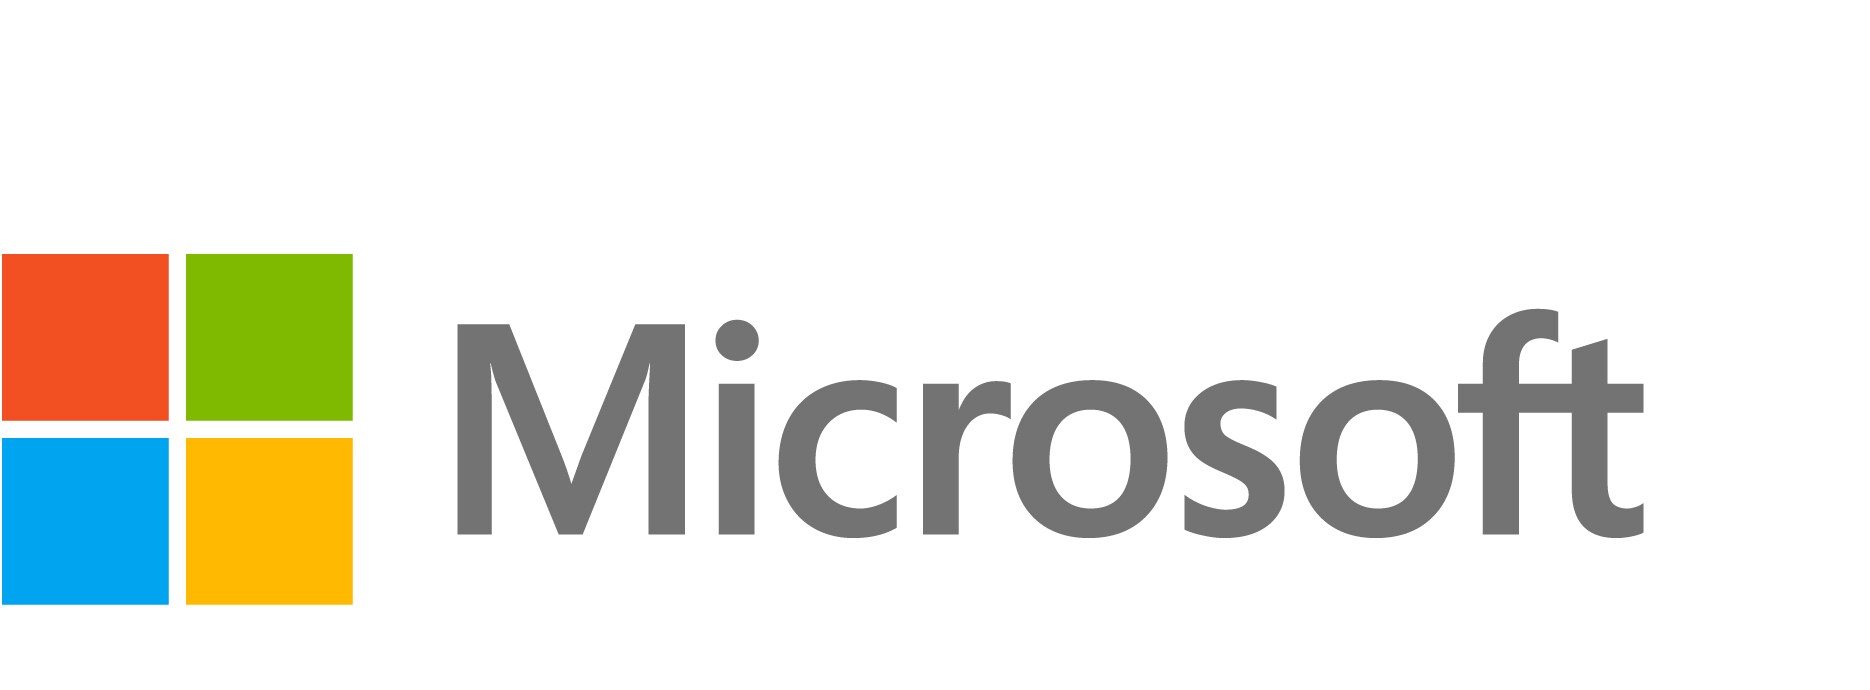 Microsoft System Center Operations Manager Client Management License - software assurance - 1 user